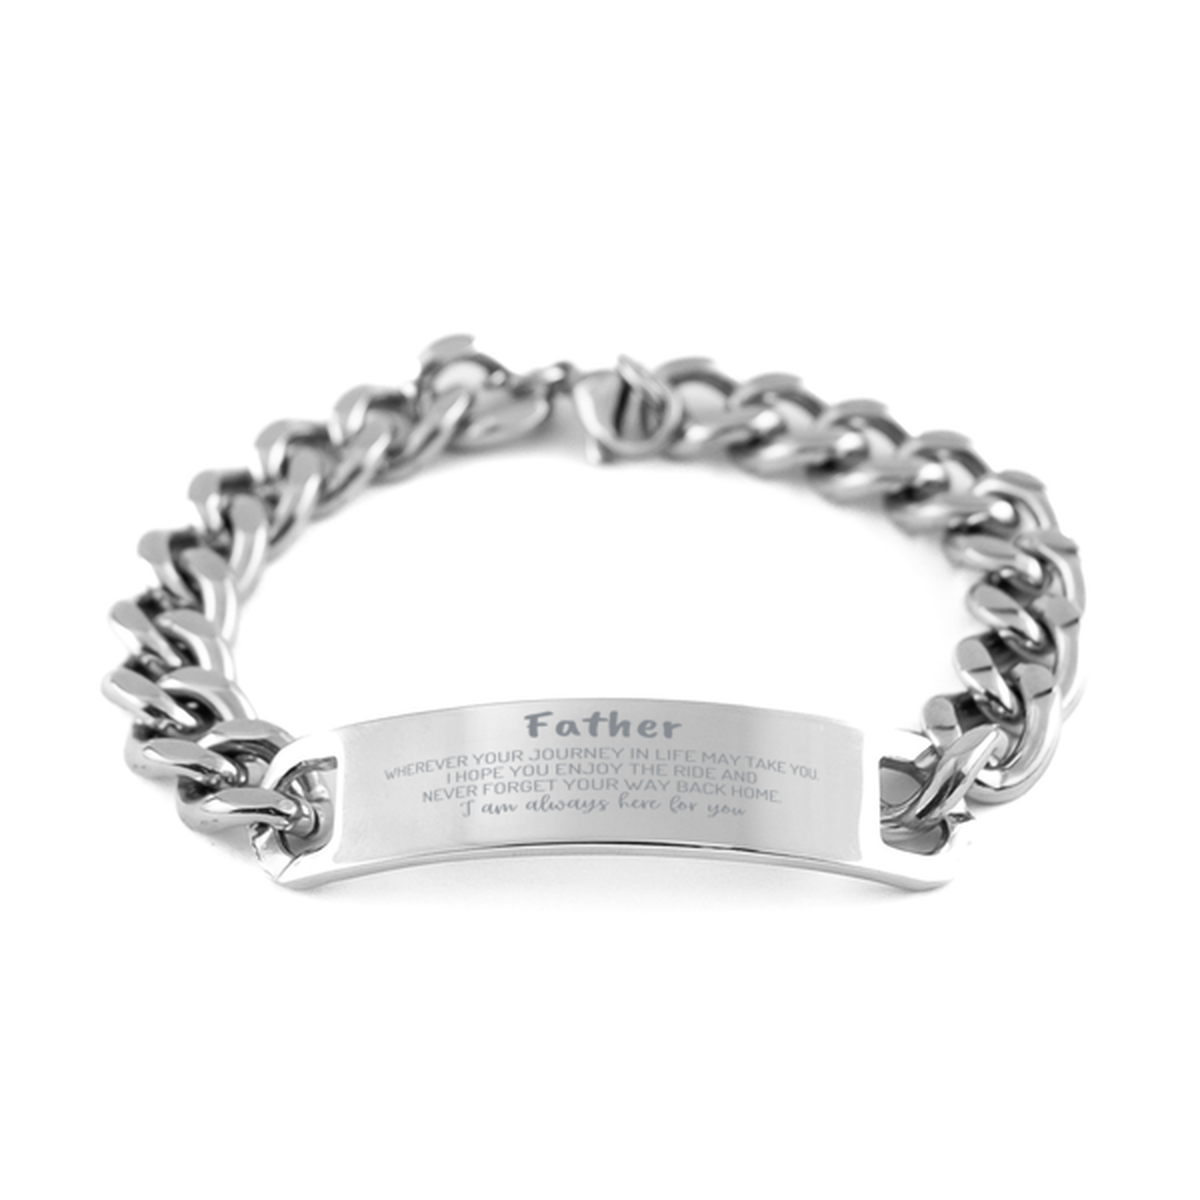 Father wherever your journey in life may take you, I am always here for you Father Cuban Chain Stainless Steel Bracelet, Awesome Christmas Gifts For Father, Father Birthday Gifts for Men Women Family Loved One